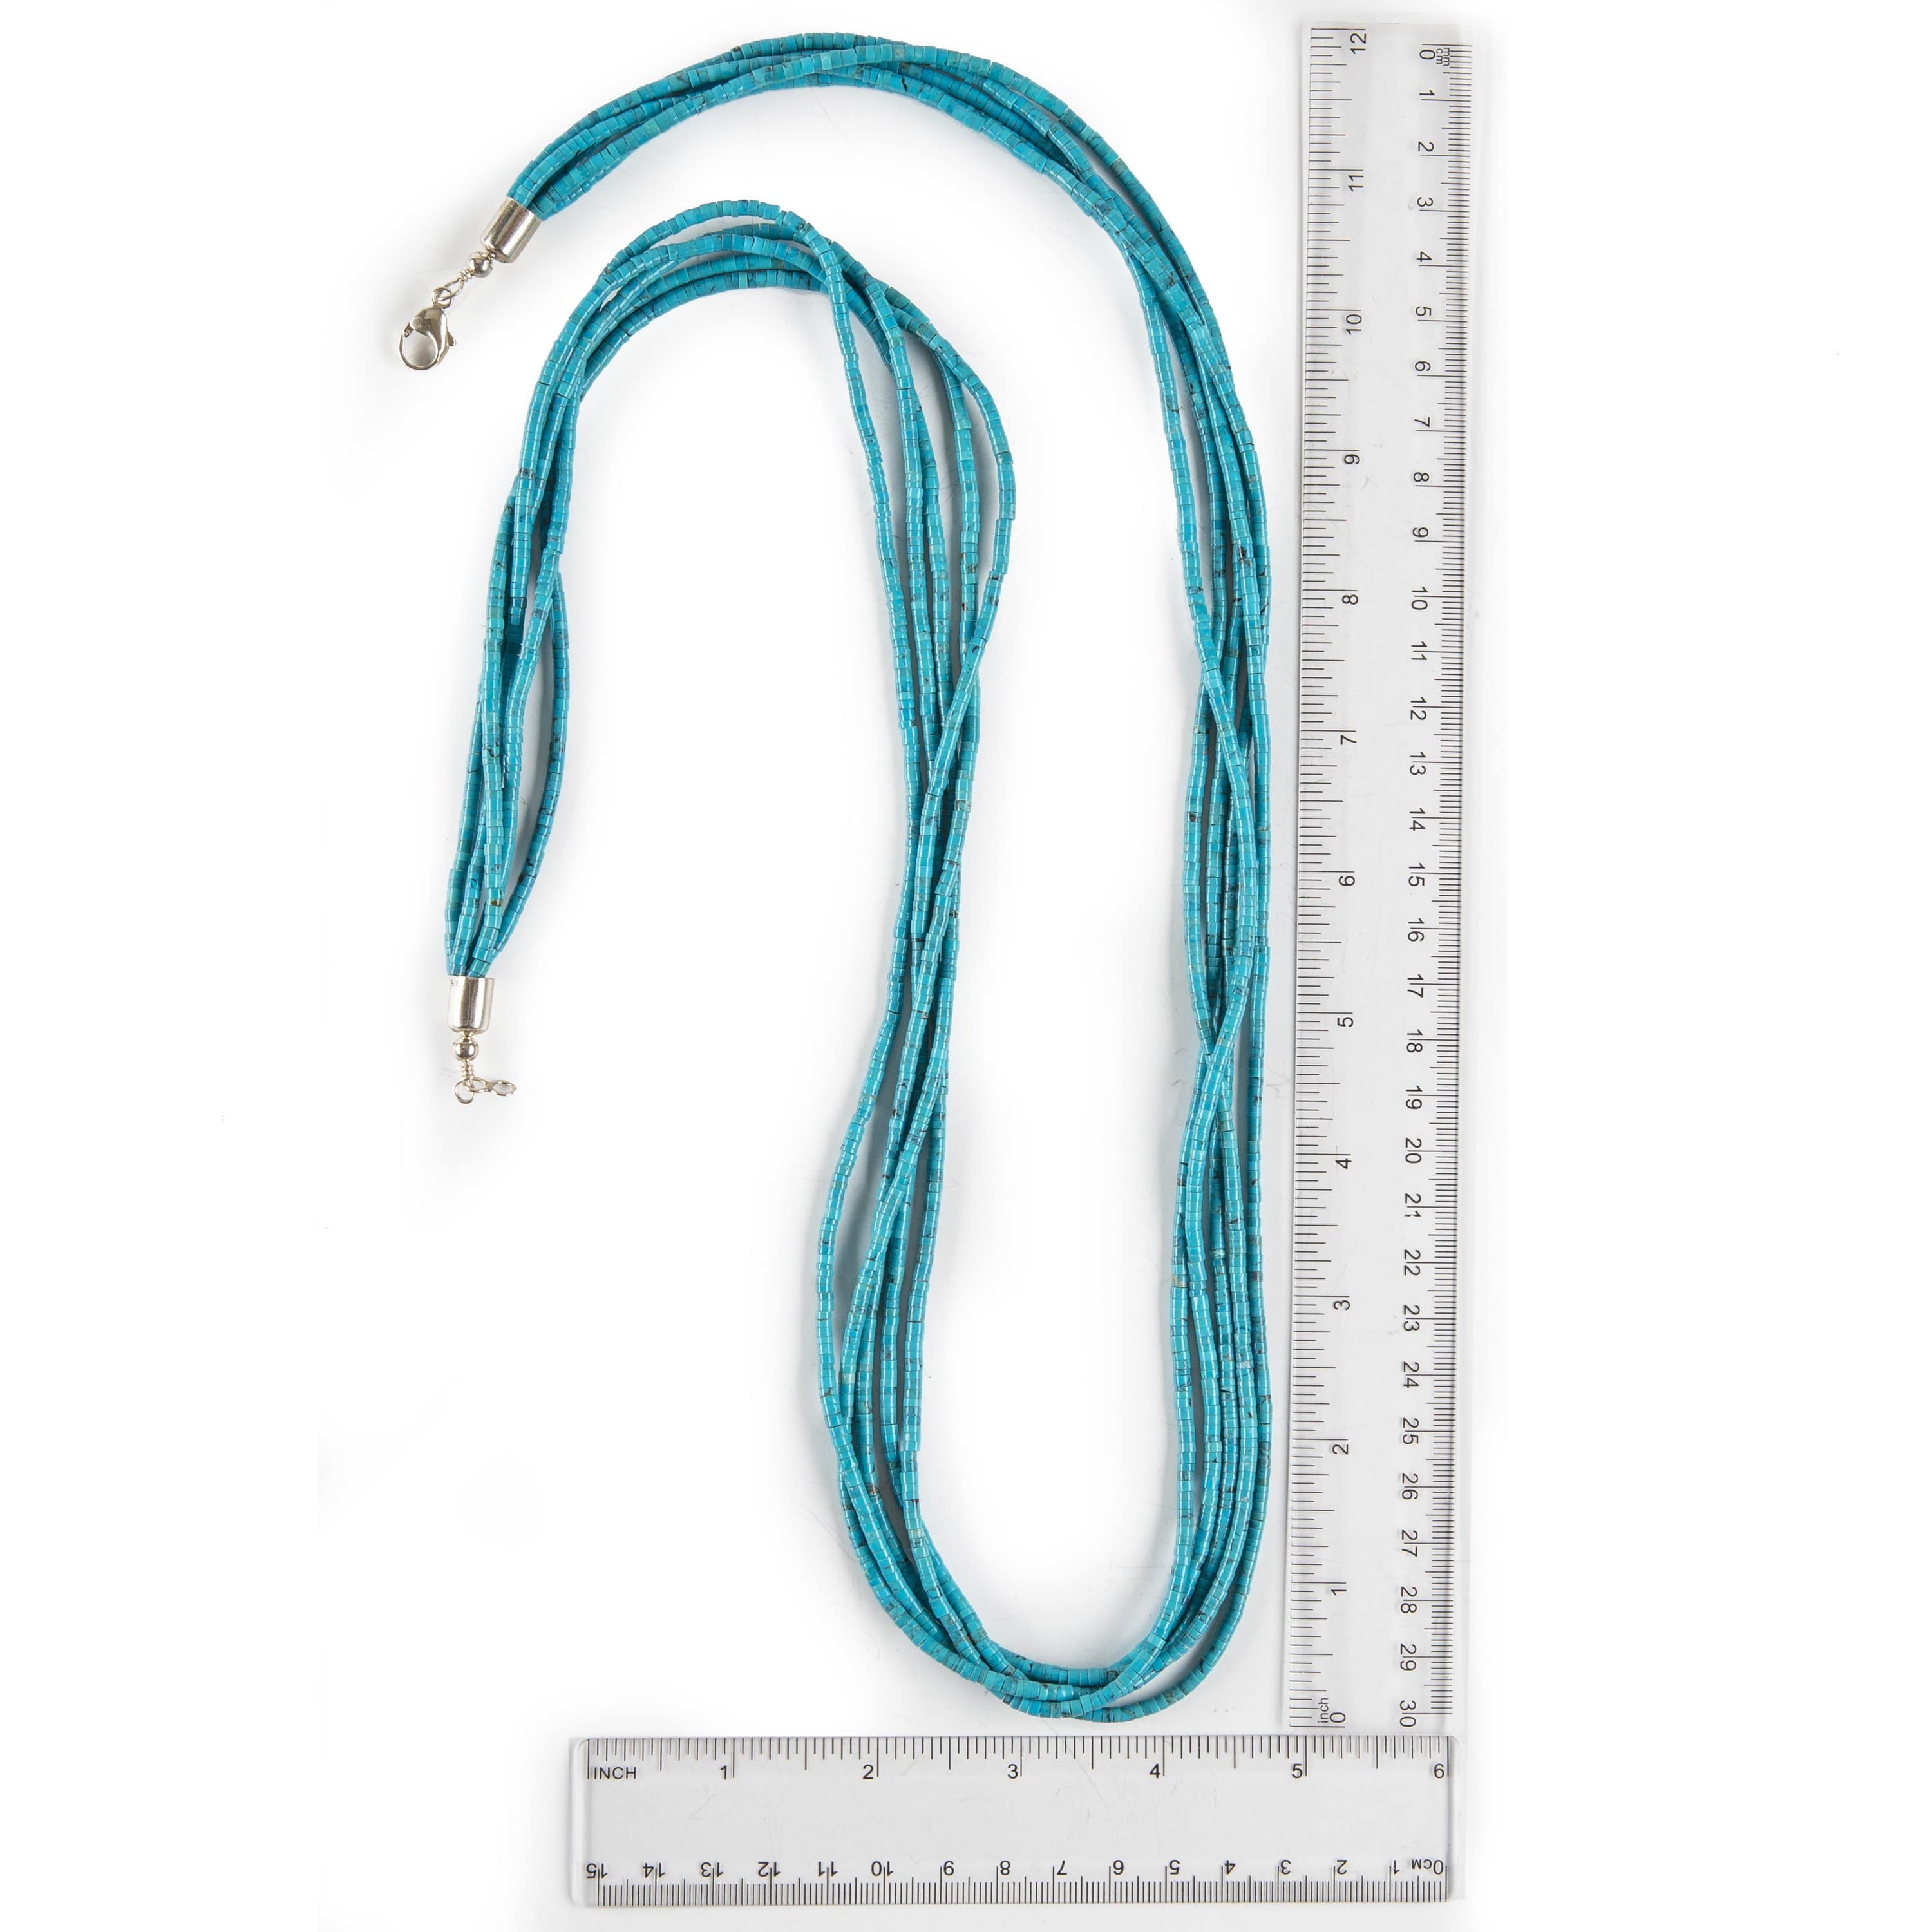 Kalifano Native American Jewelry 36" Five Strand Genuine Campitos Turquoise USA Native American Made 925 Sterling Silver Necklace NAN1200.008